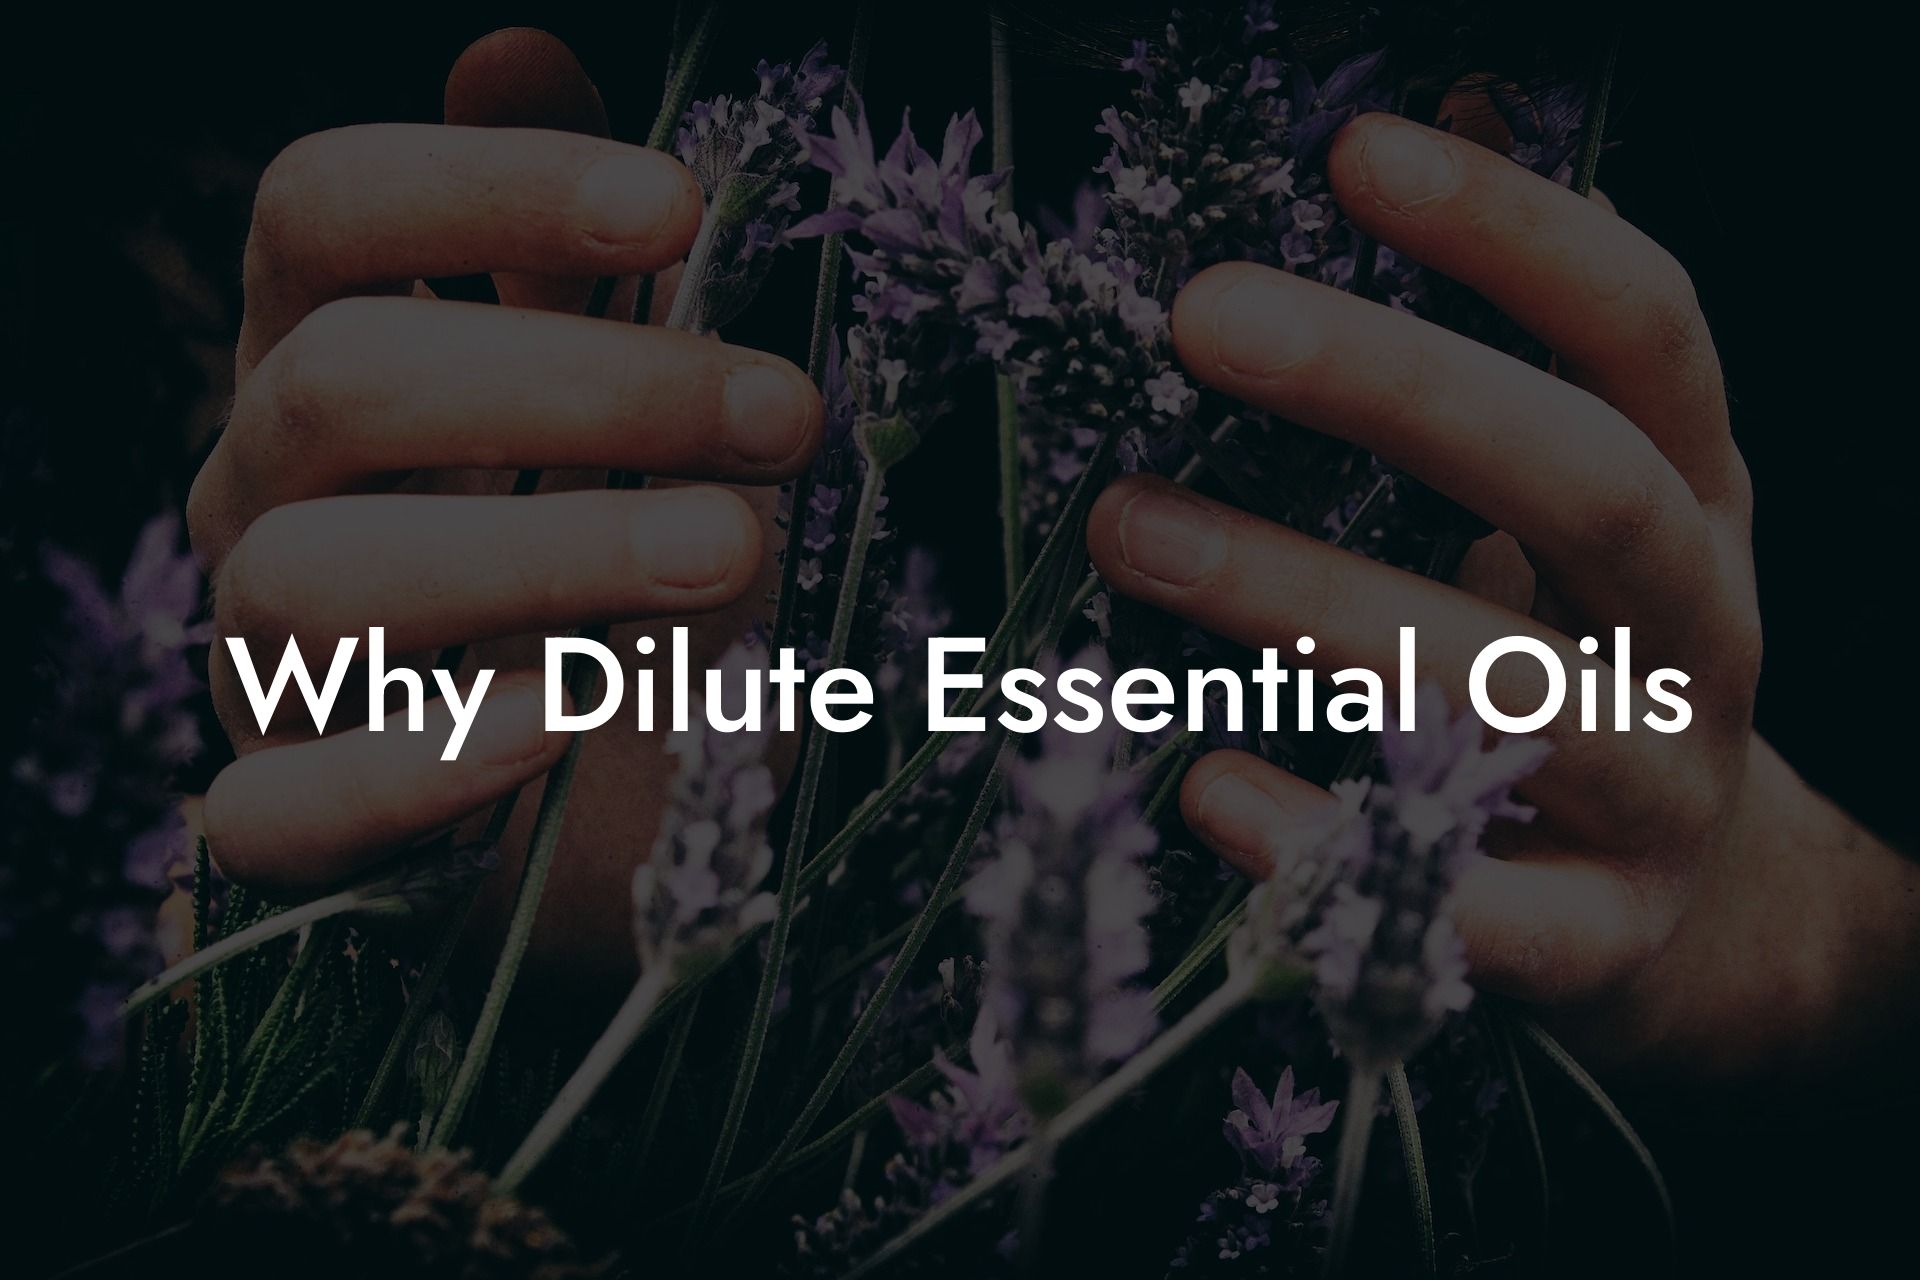 Why Dilute Essential Oils